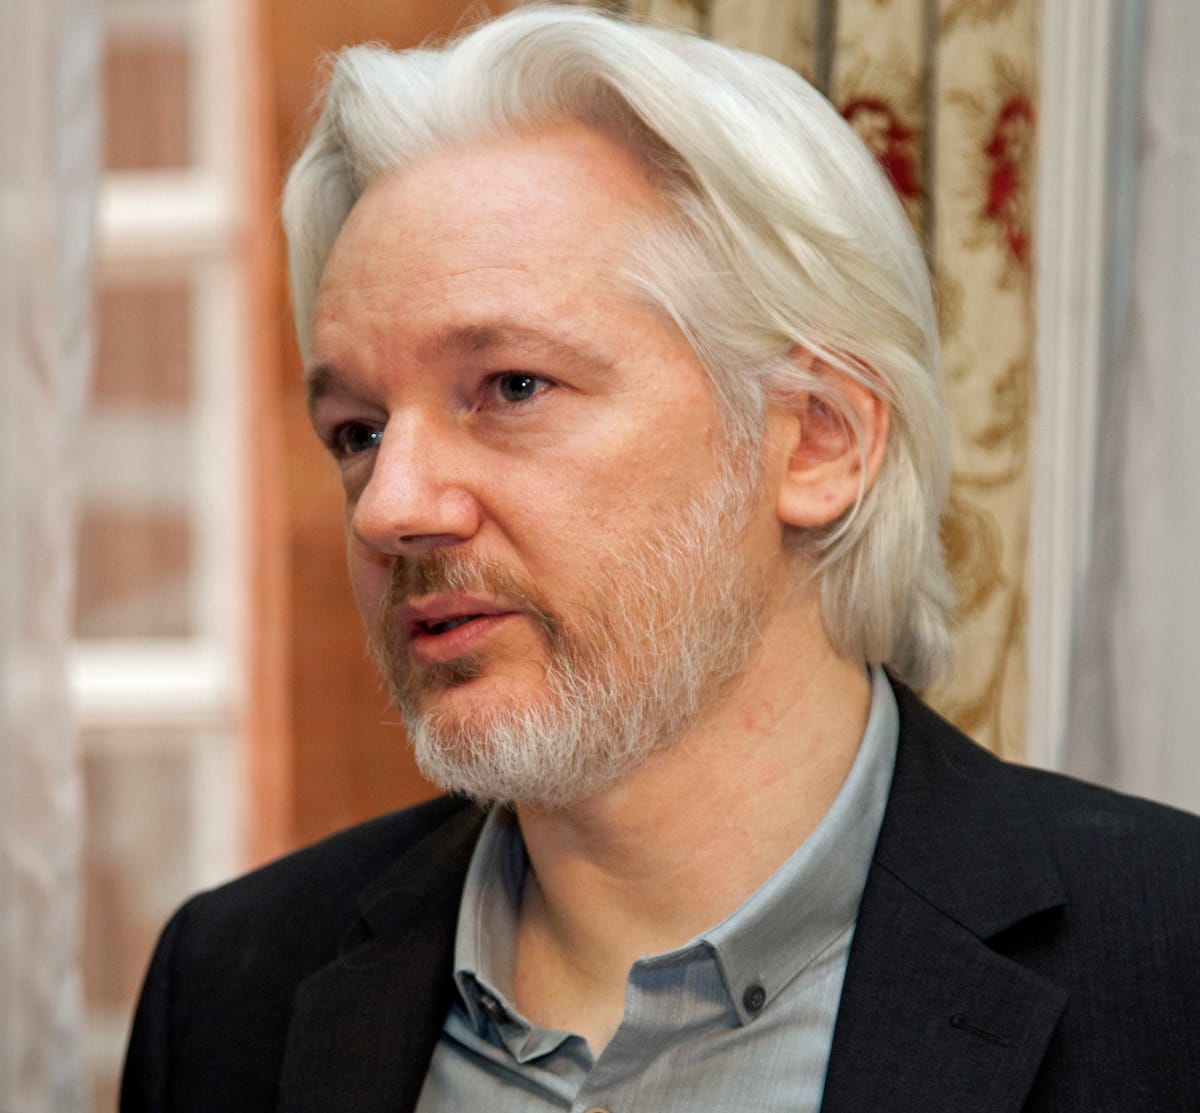 Julian Assange's Freedom: A Pyrrhic Victory for Press Freedom?